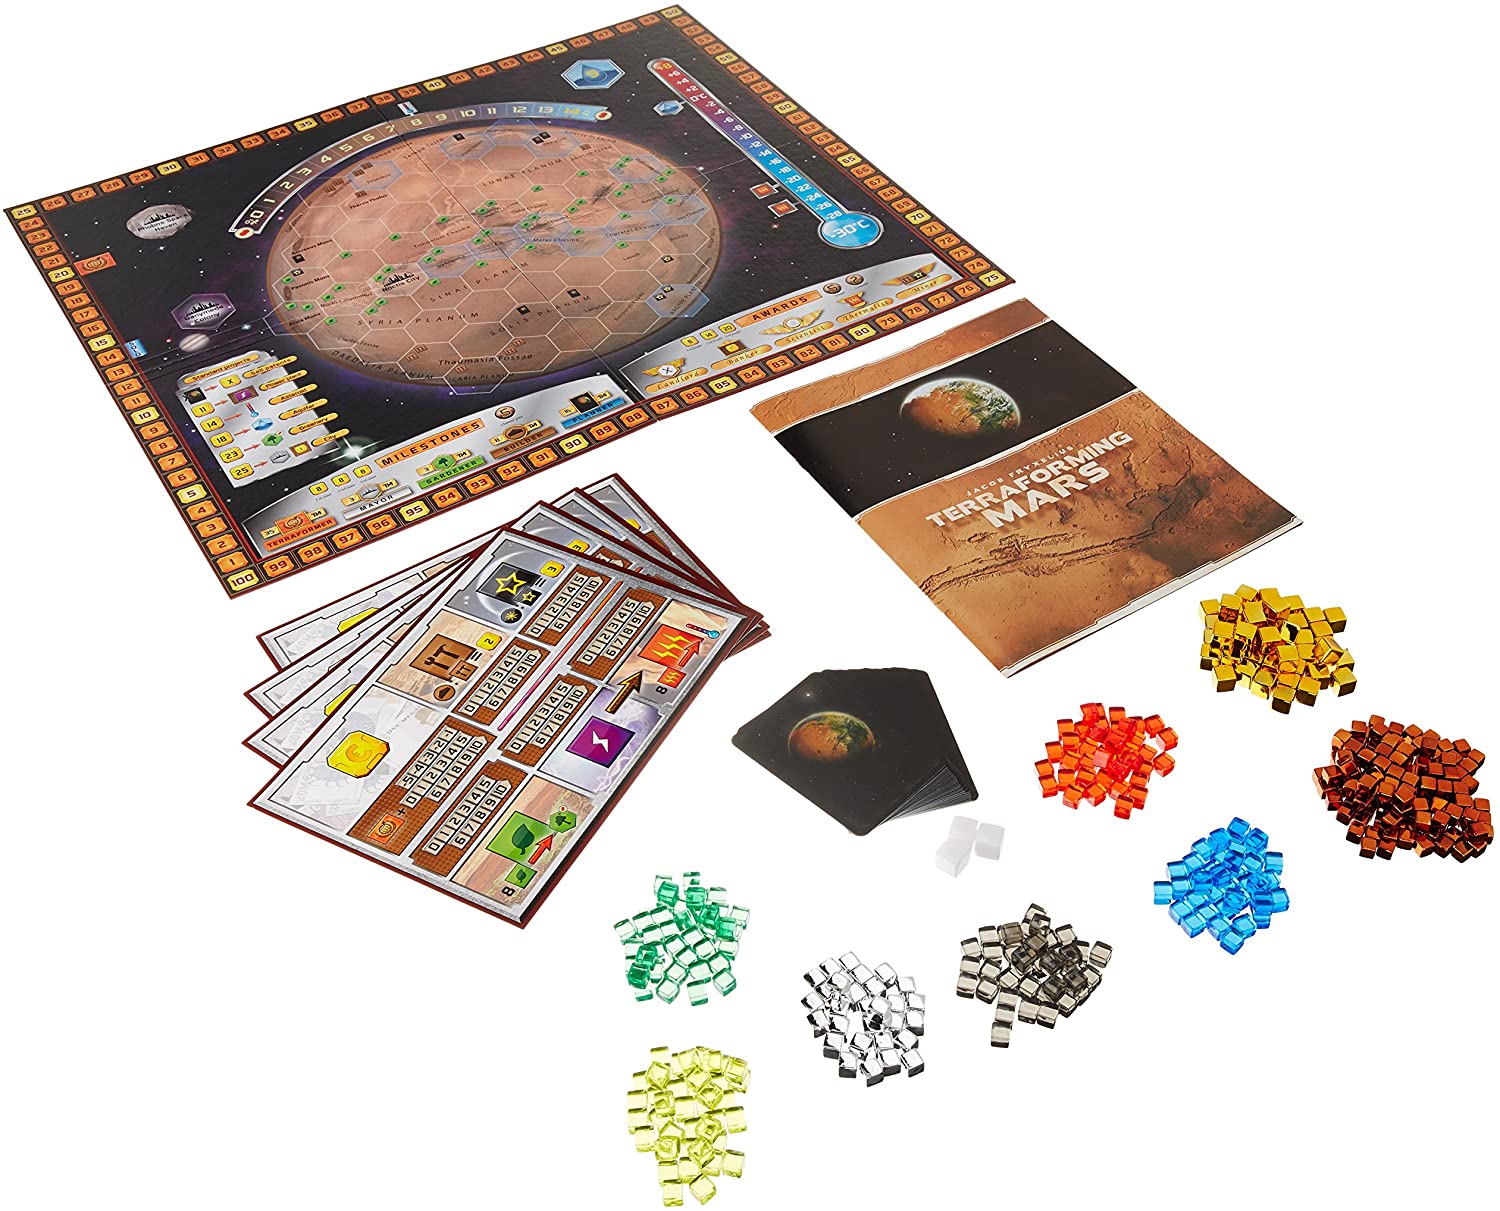 Find out about Terraforming Mars